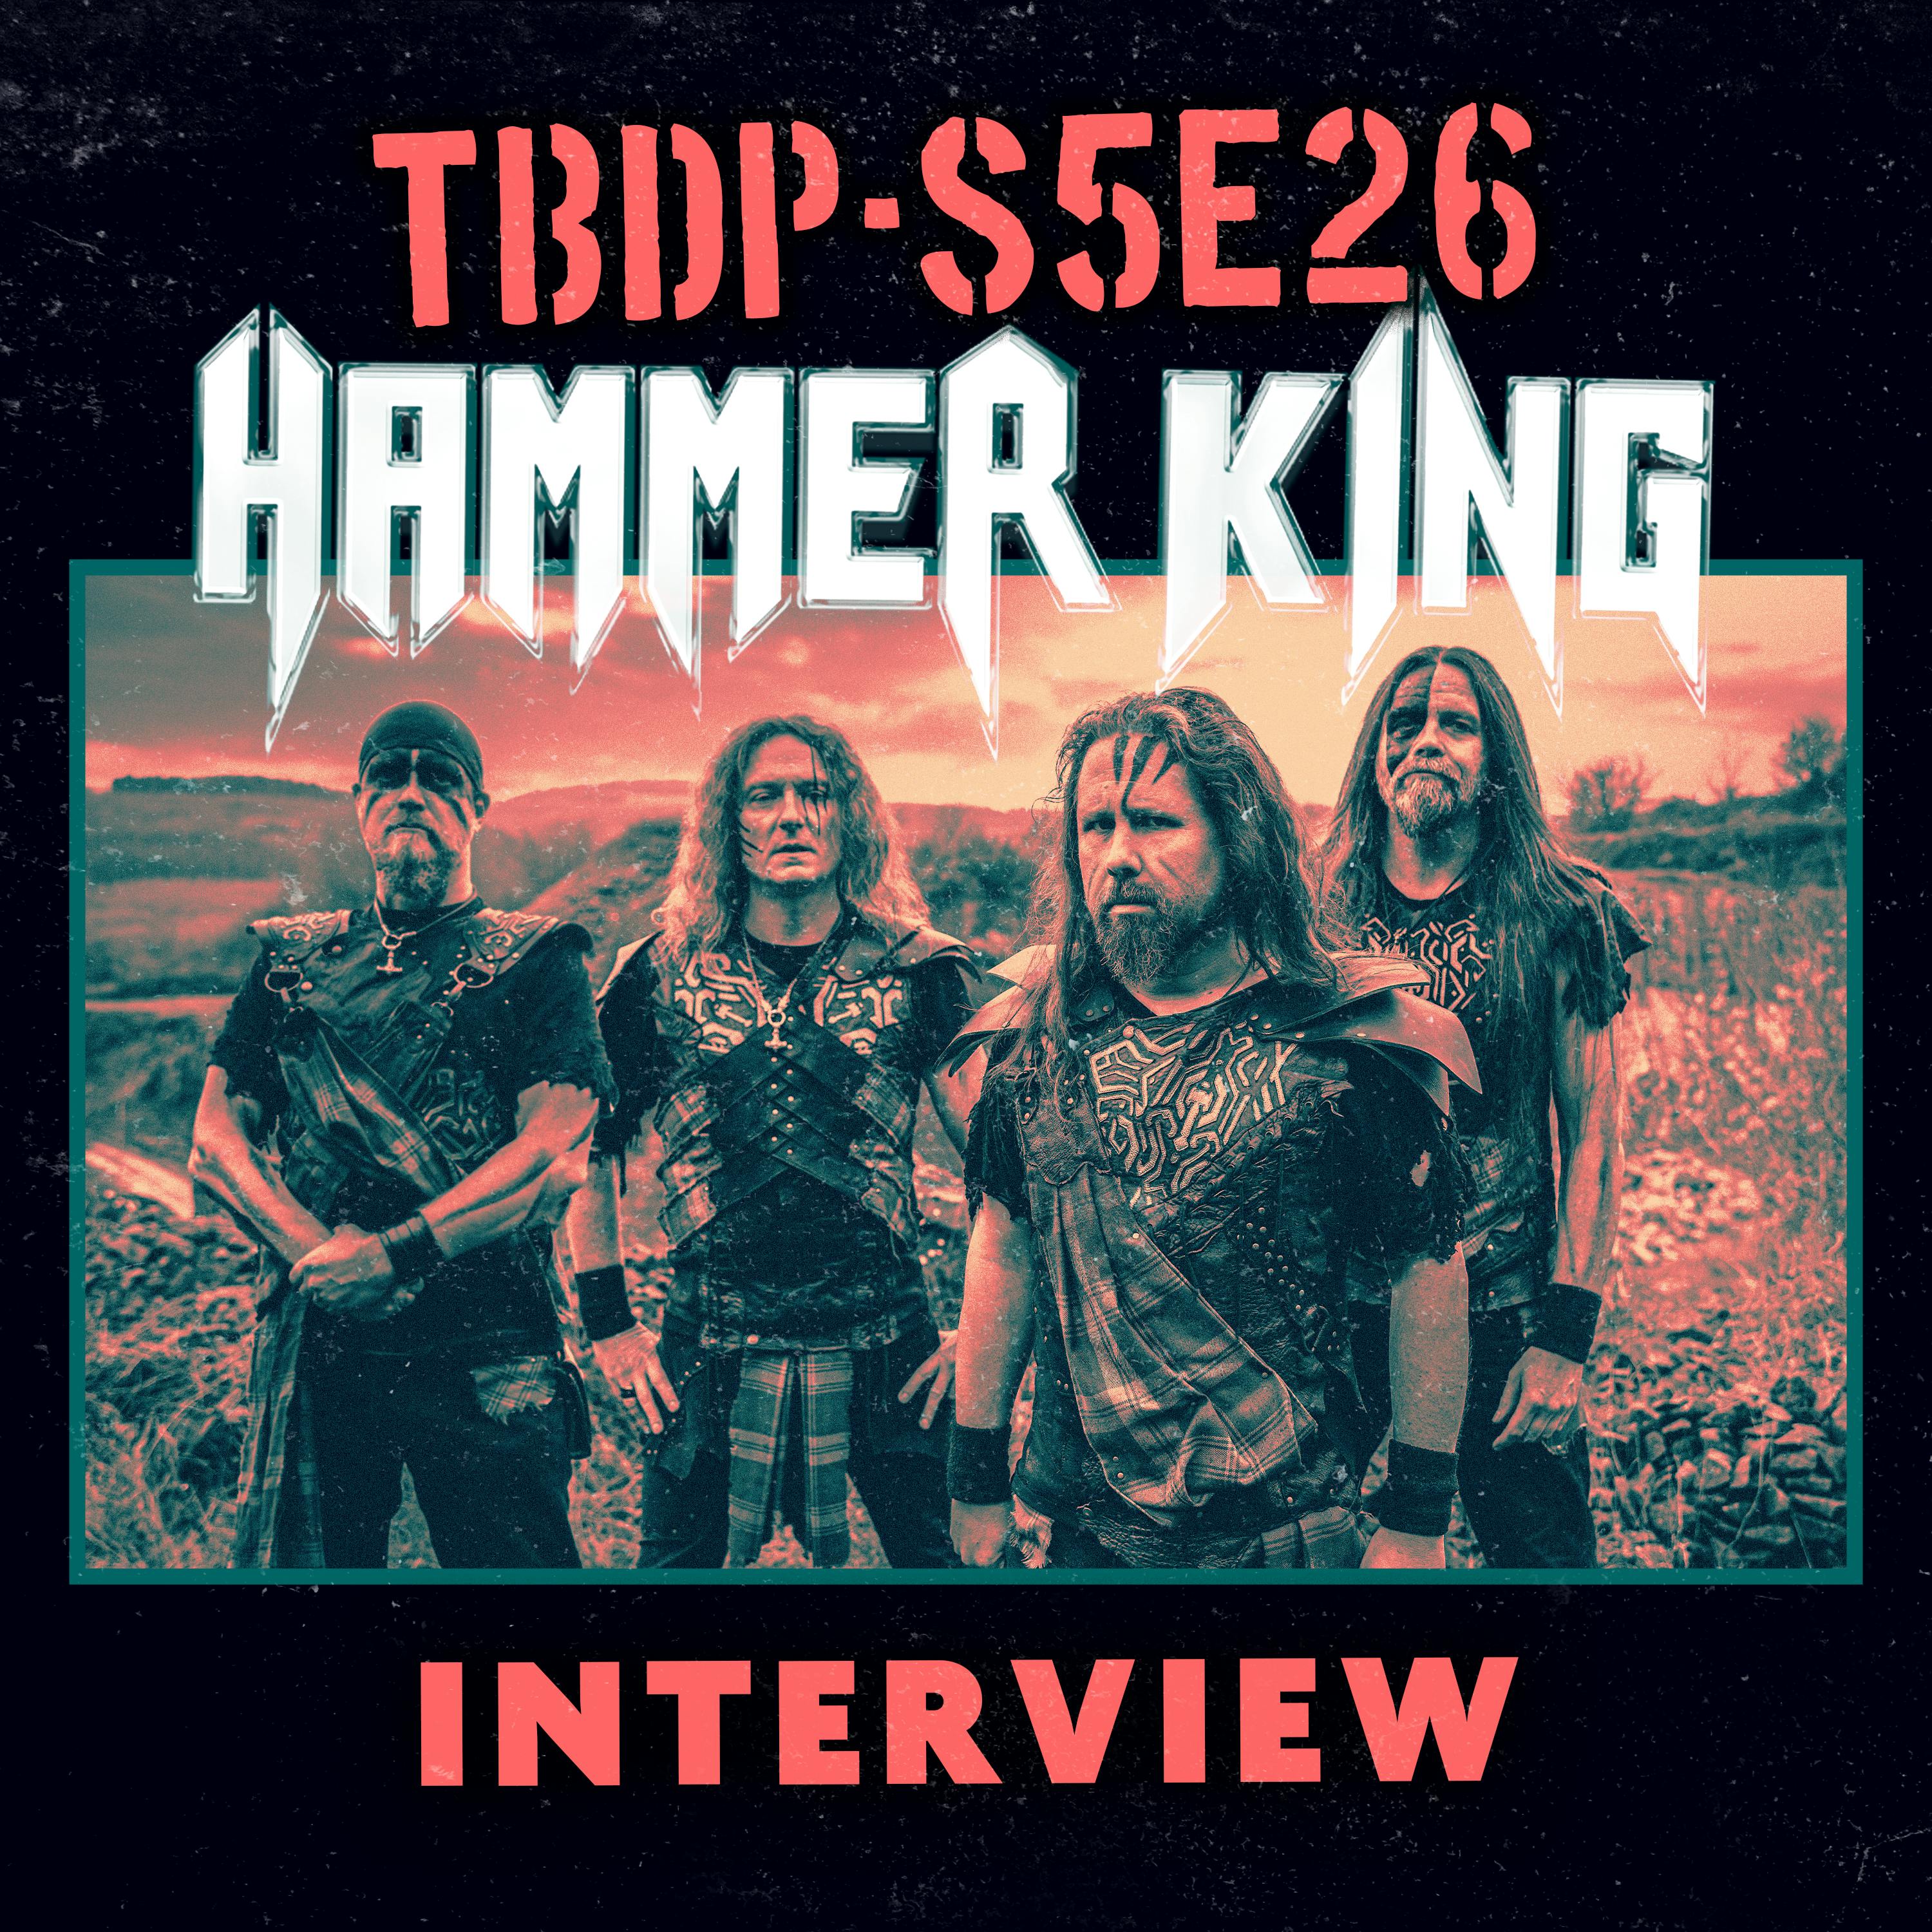 An Interview with Hammer King- Season 5 Eps. #26